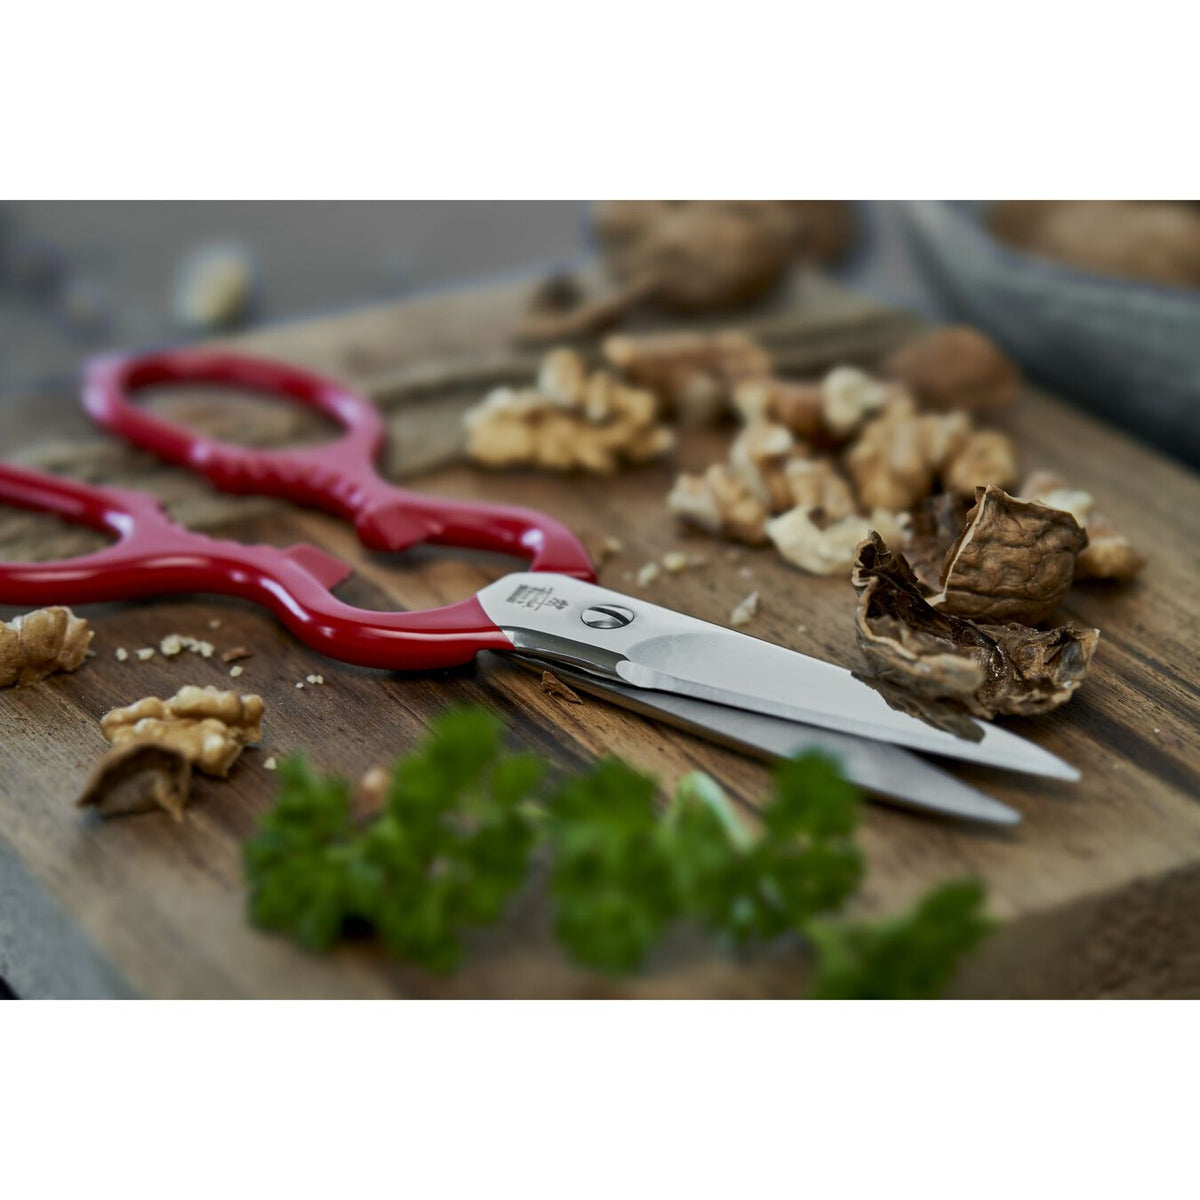 https://www.tanager.shop/wp-content/uploads/1691/20/every-client-is-treated-like-family-finding-the-zwilling-shears-scissors-multi-purpose-kitchen-shears-red-tanager-housewares-to-meet-the-needs-of-people-is-our-passion_0.jpg